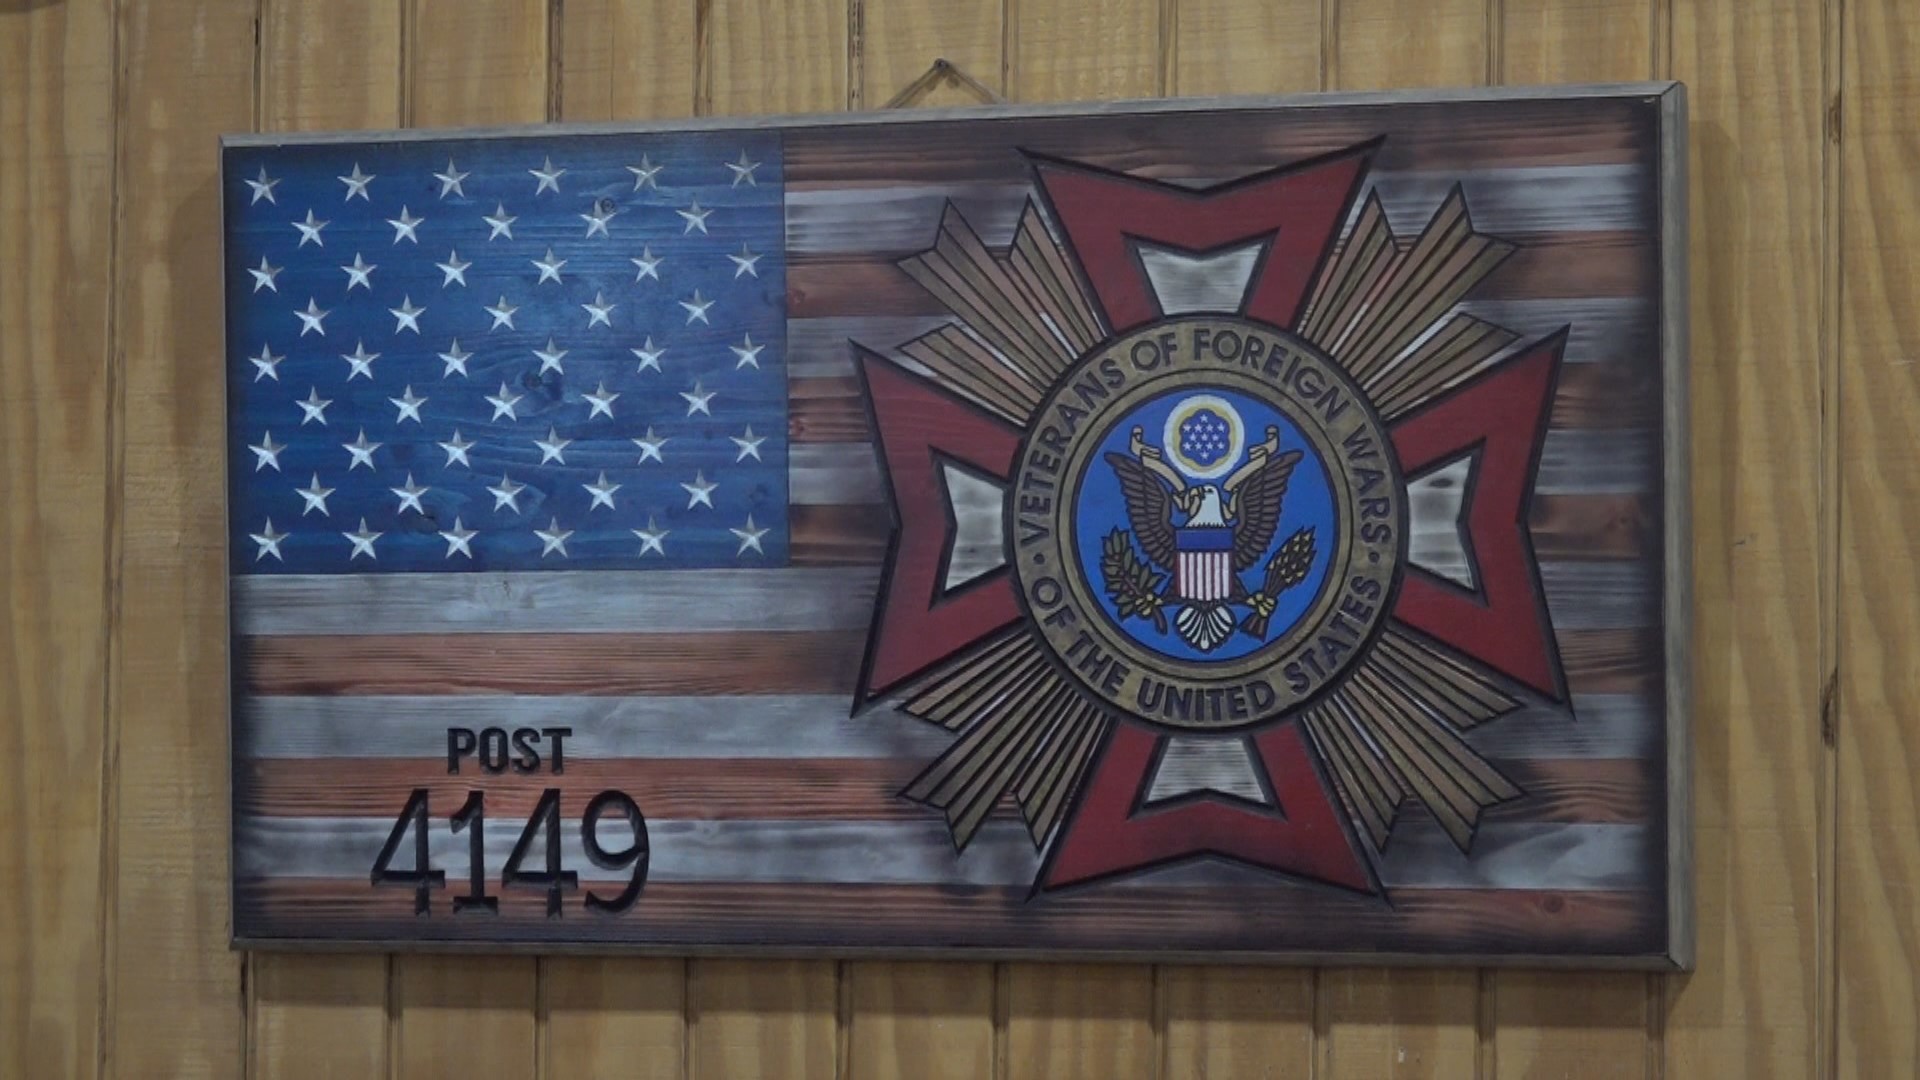 VFW Post 4149 Auxiliary held a lunch for veterans to pay their respects on Memorial Day.